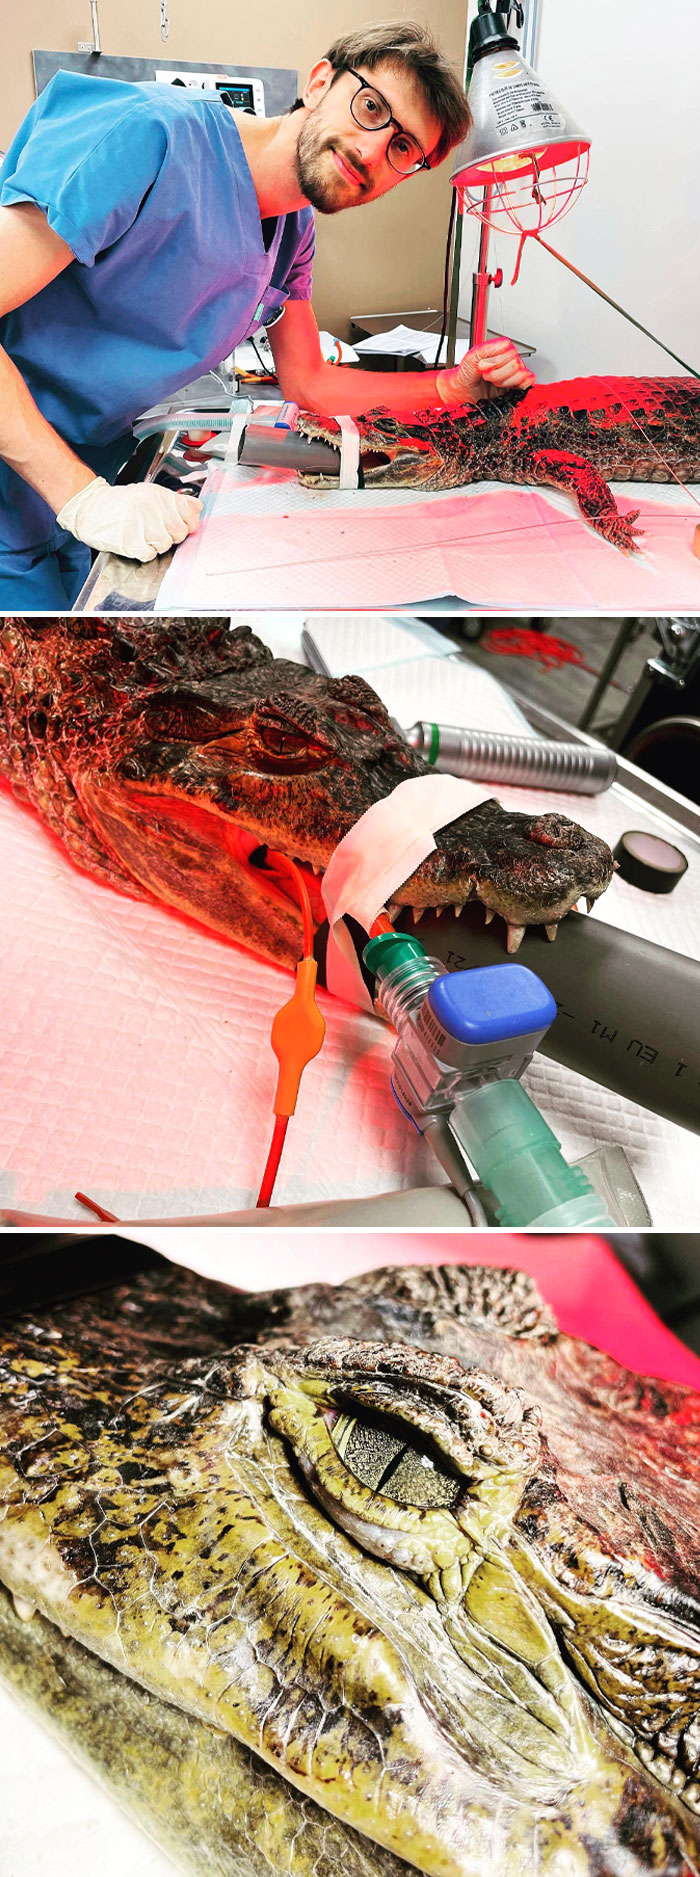 The Endoscopy Revealed And Made It Possible To Remove 2 Suction Cups Accidentally Ingested By This Crocodilian